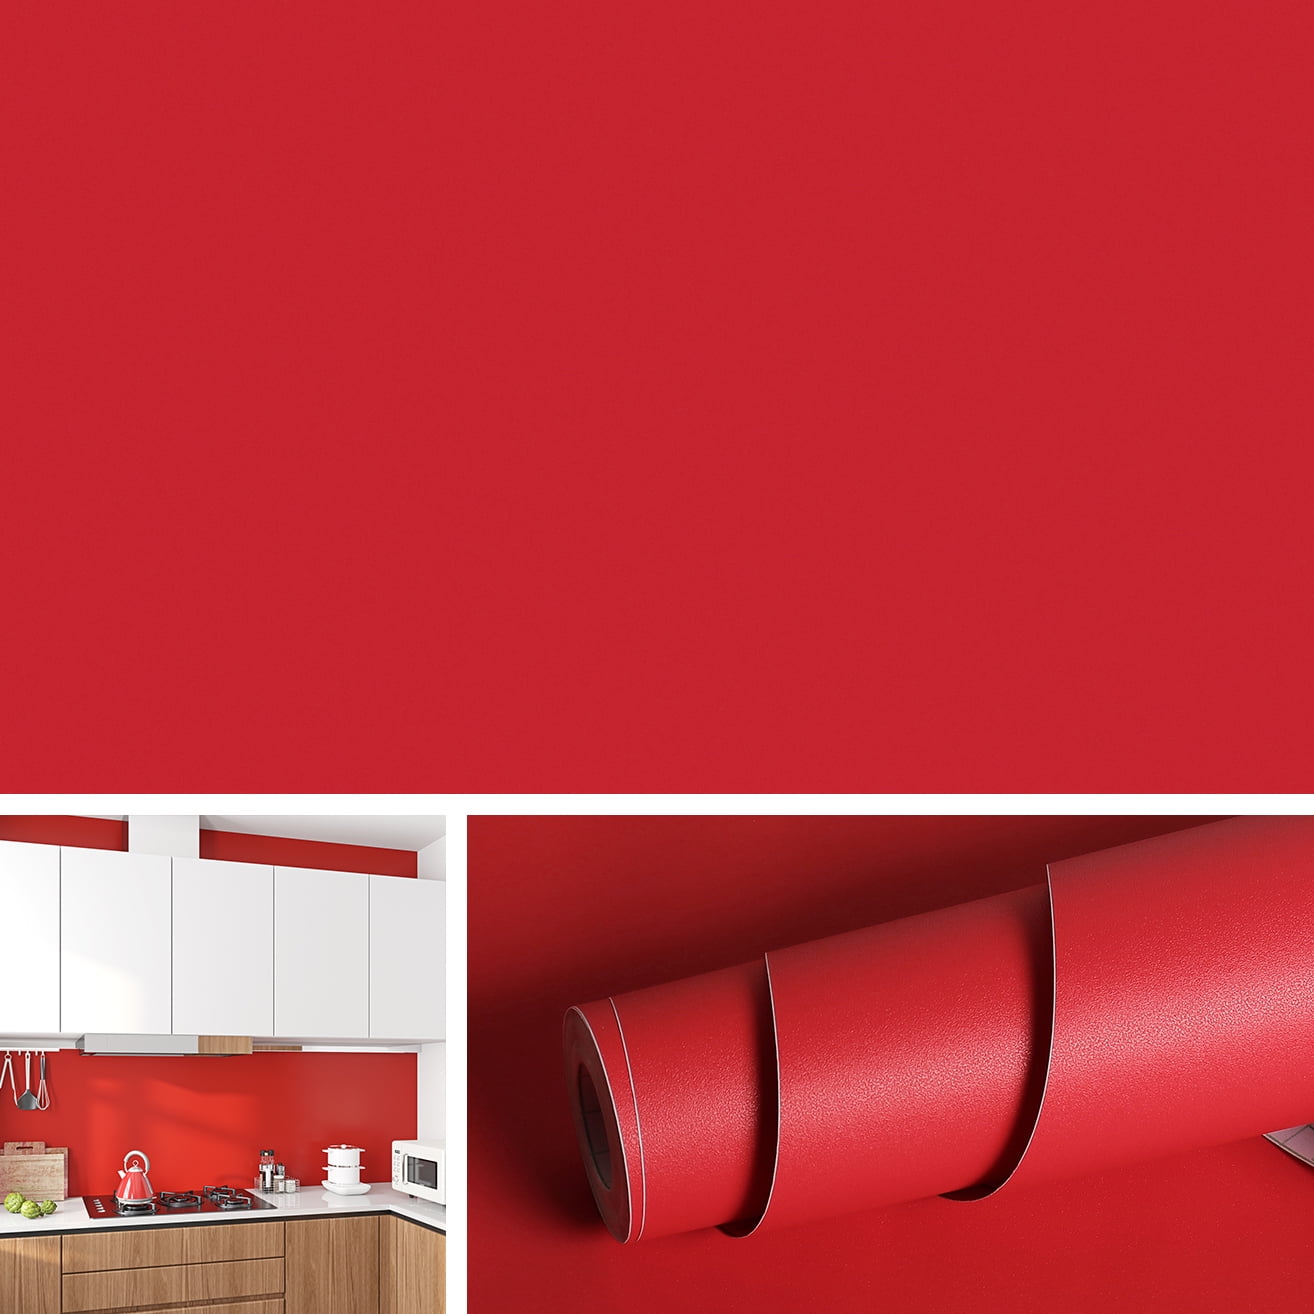 Livelynine 16x394 Inch Red Wall Paper Decorations Removable Wallpaper Peel  and Stick Red Vinyl Roll Self Adhesive Fadeless Paper Waterproof Removable  - Walmart.com